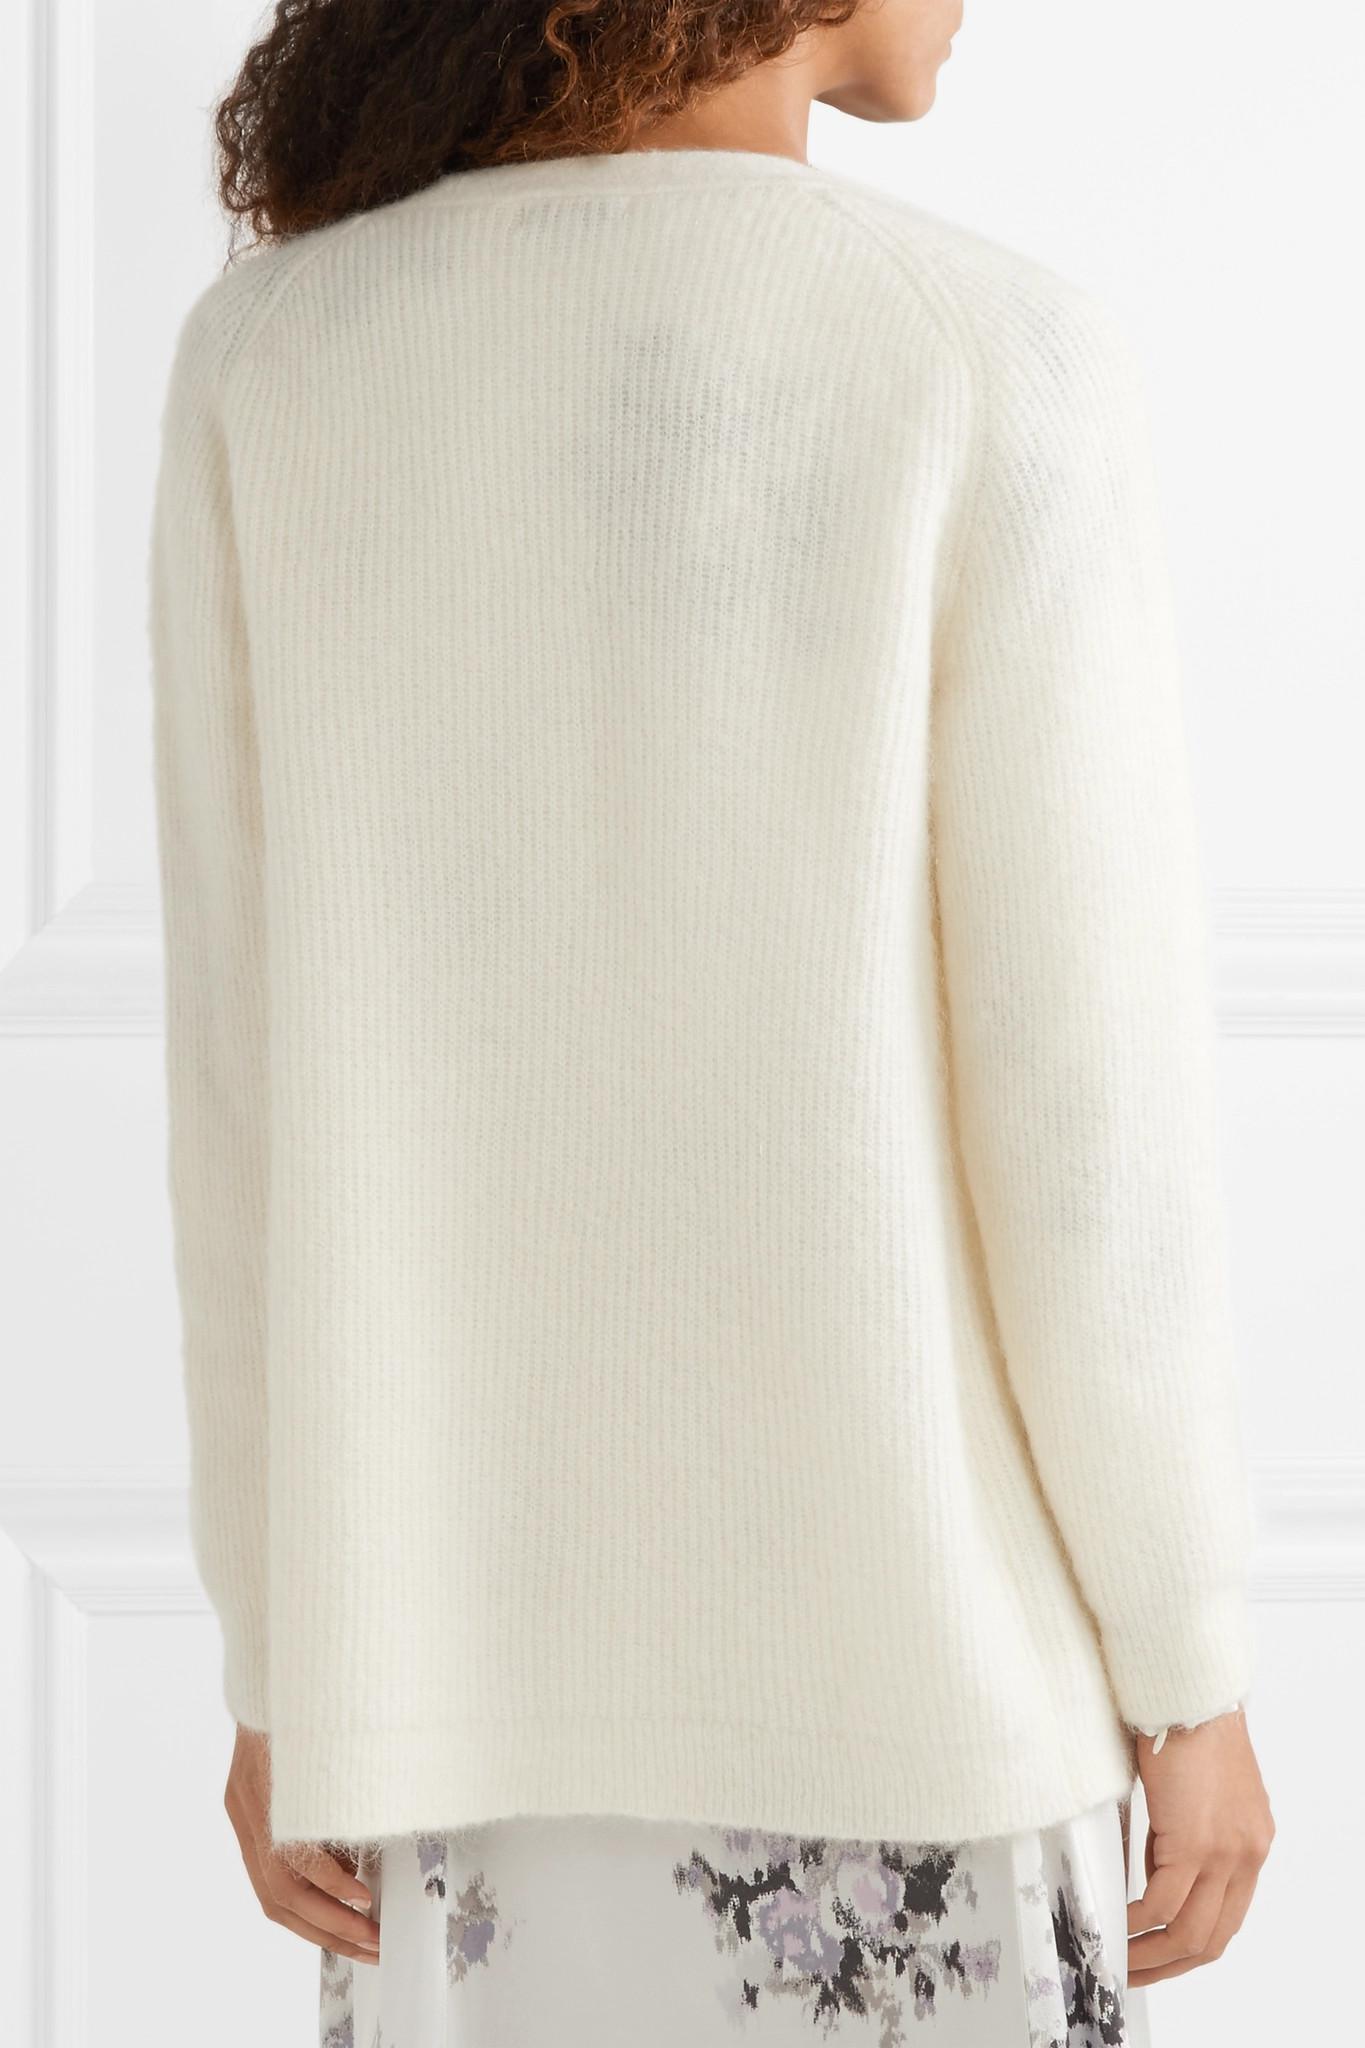 Ganni Wool Callahan Oversized Ribbed-knit Cardigan in Cream (Natural) - Lyst